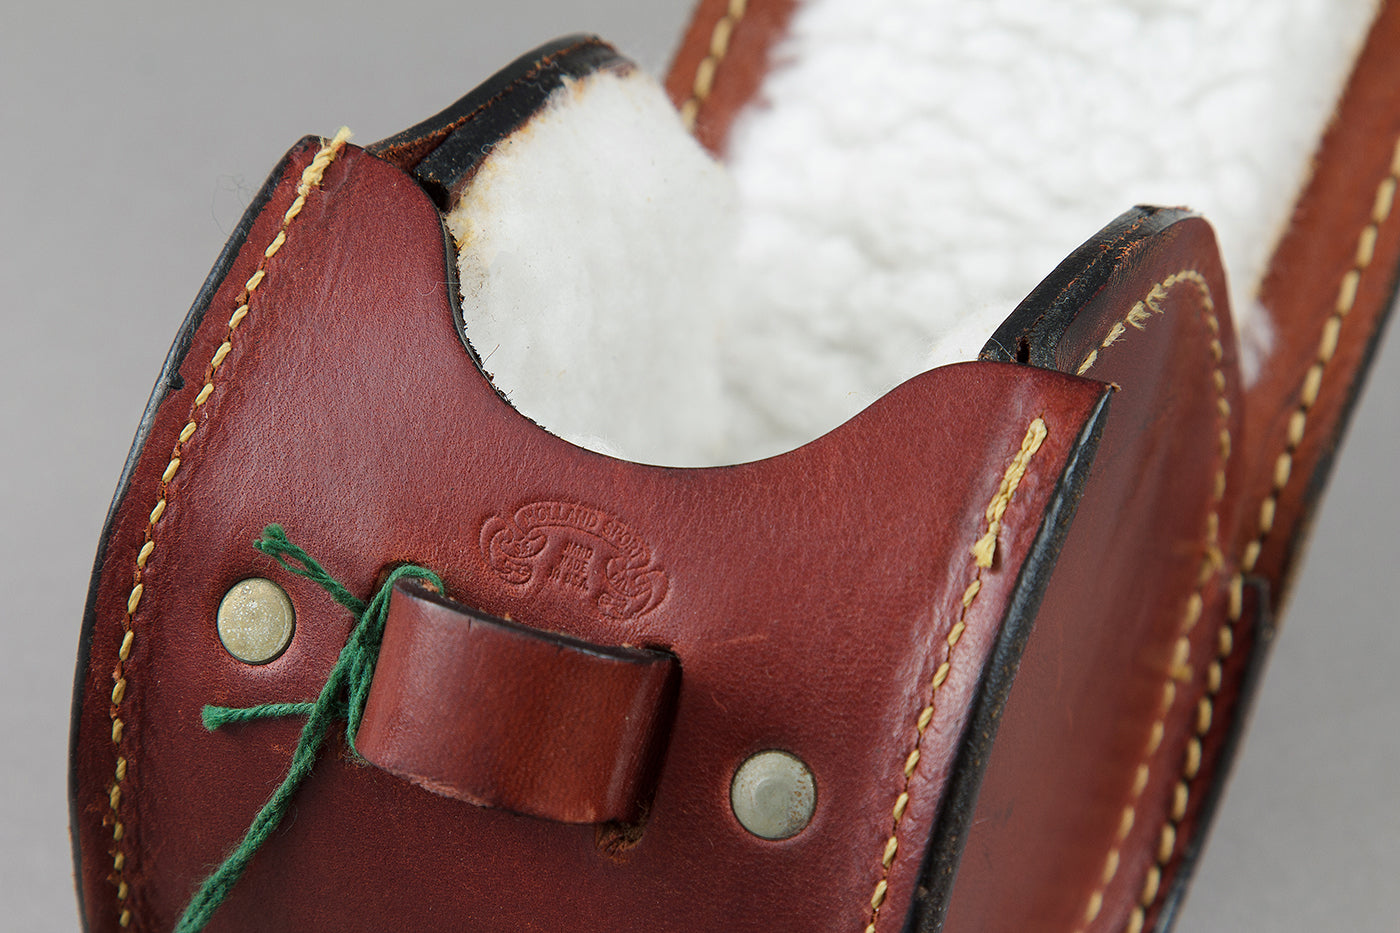 Orvis & Holland – Leather Reel Case 4